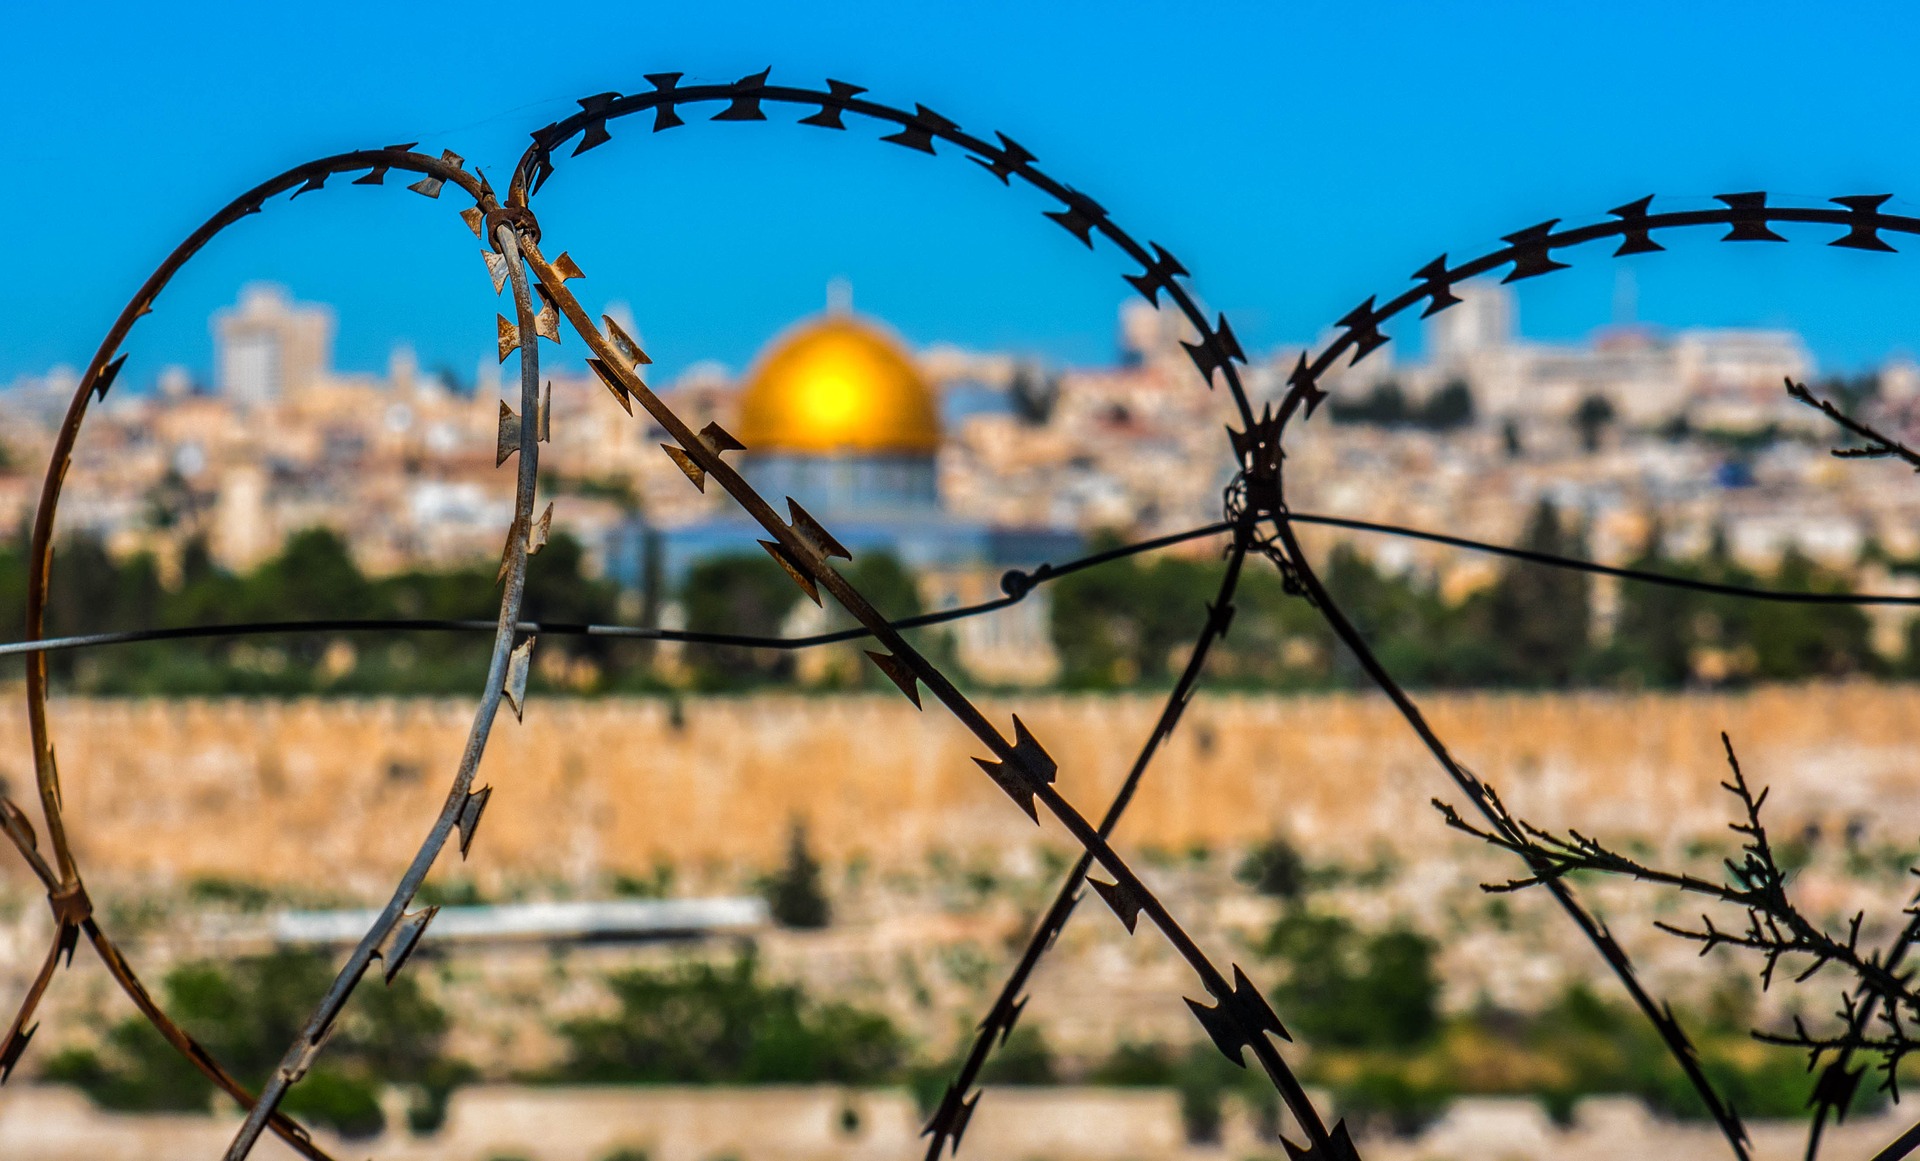 Is it OK to Visit the Most Oppressive or Occupied Countries? Gone